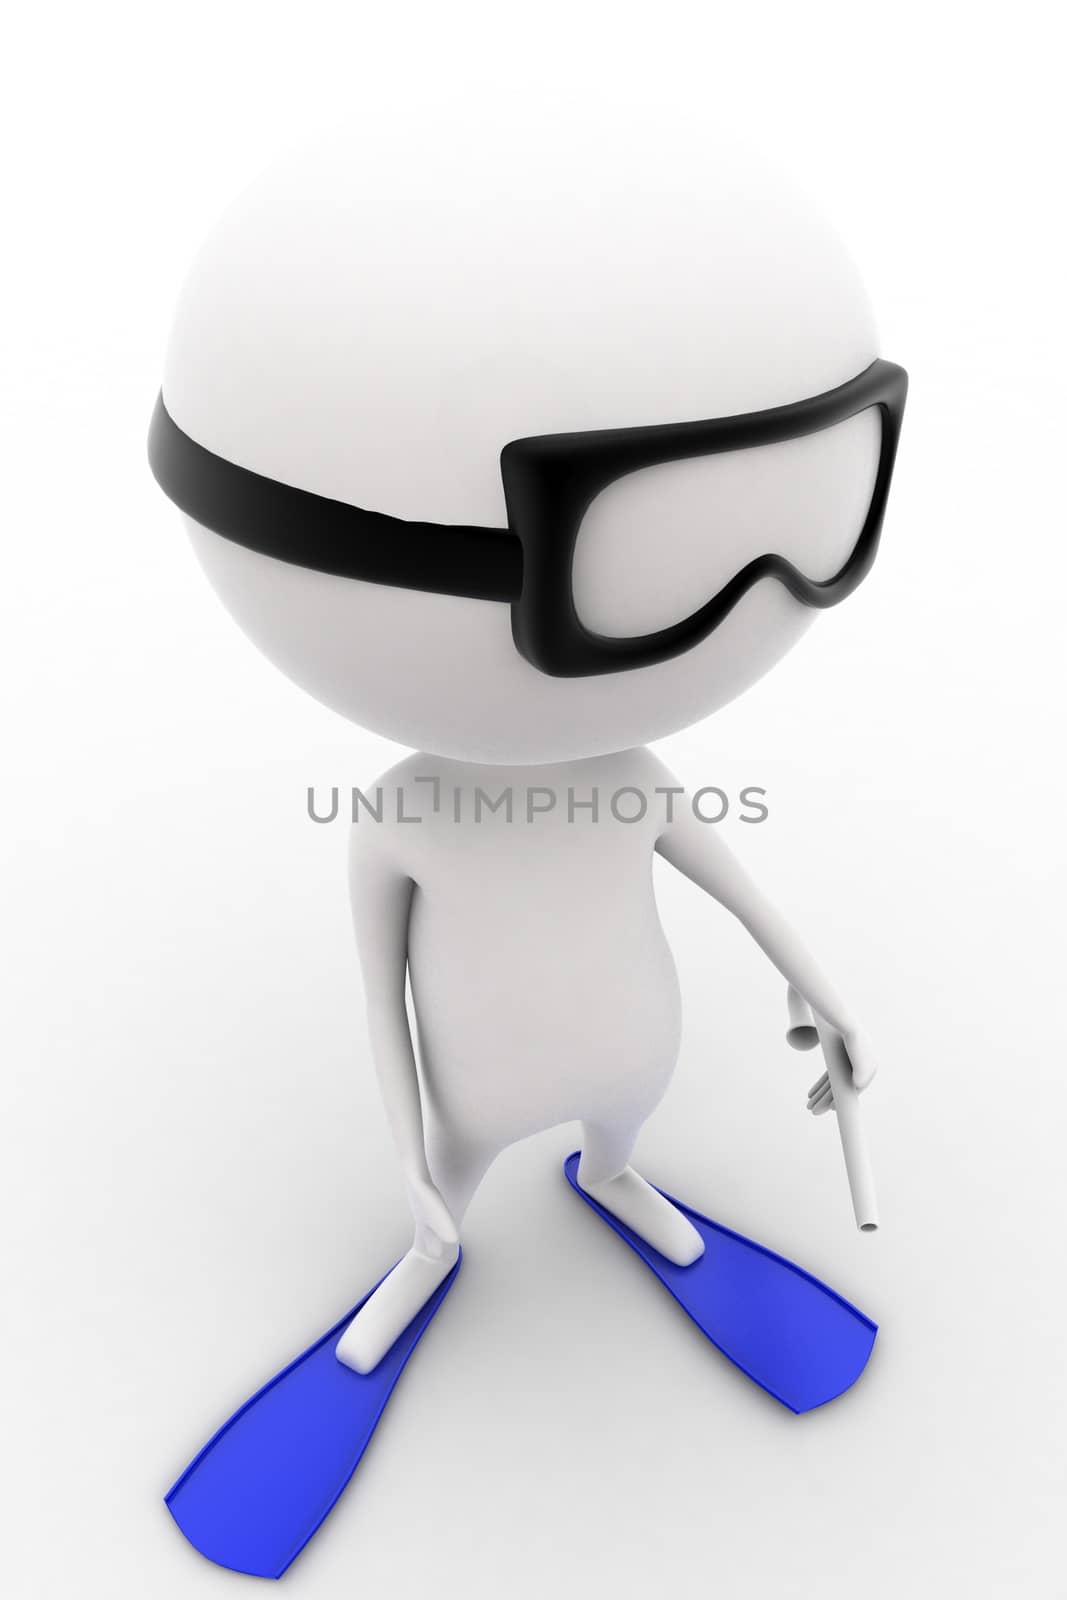 3d swimming man concept  by touchmenithin@gmail.com